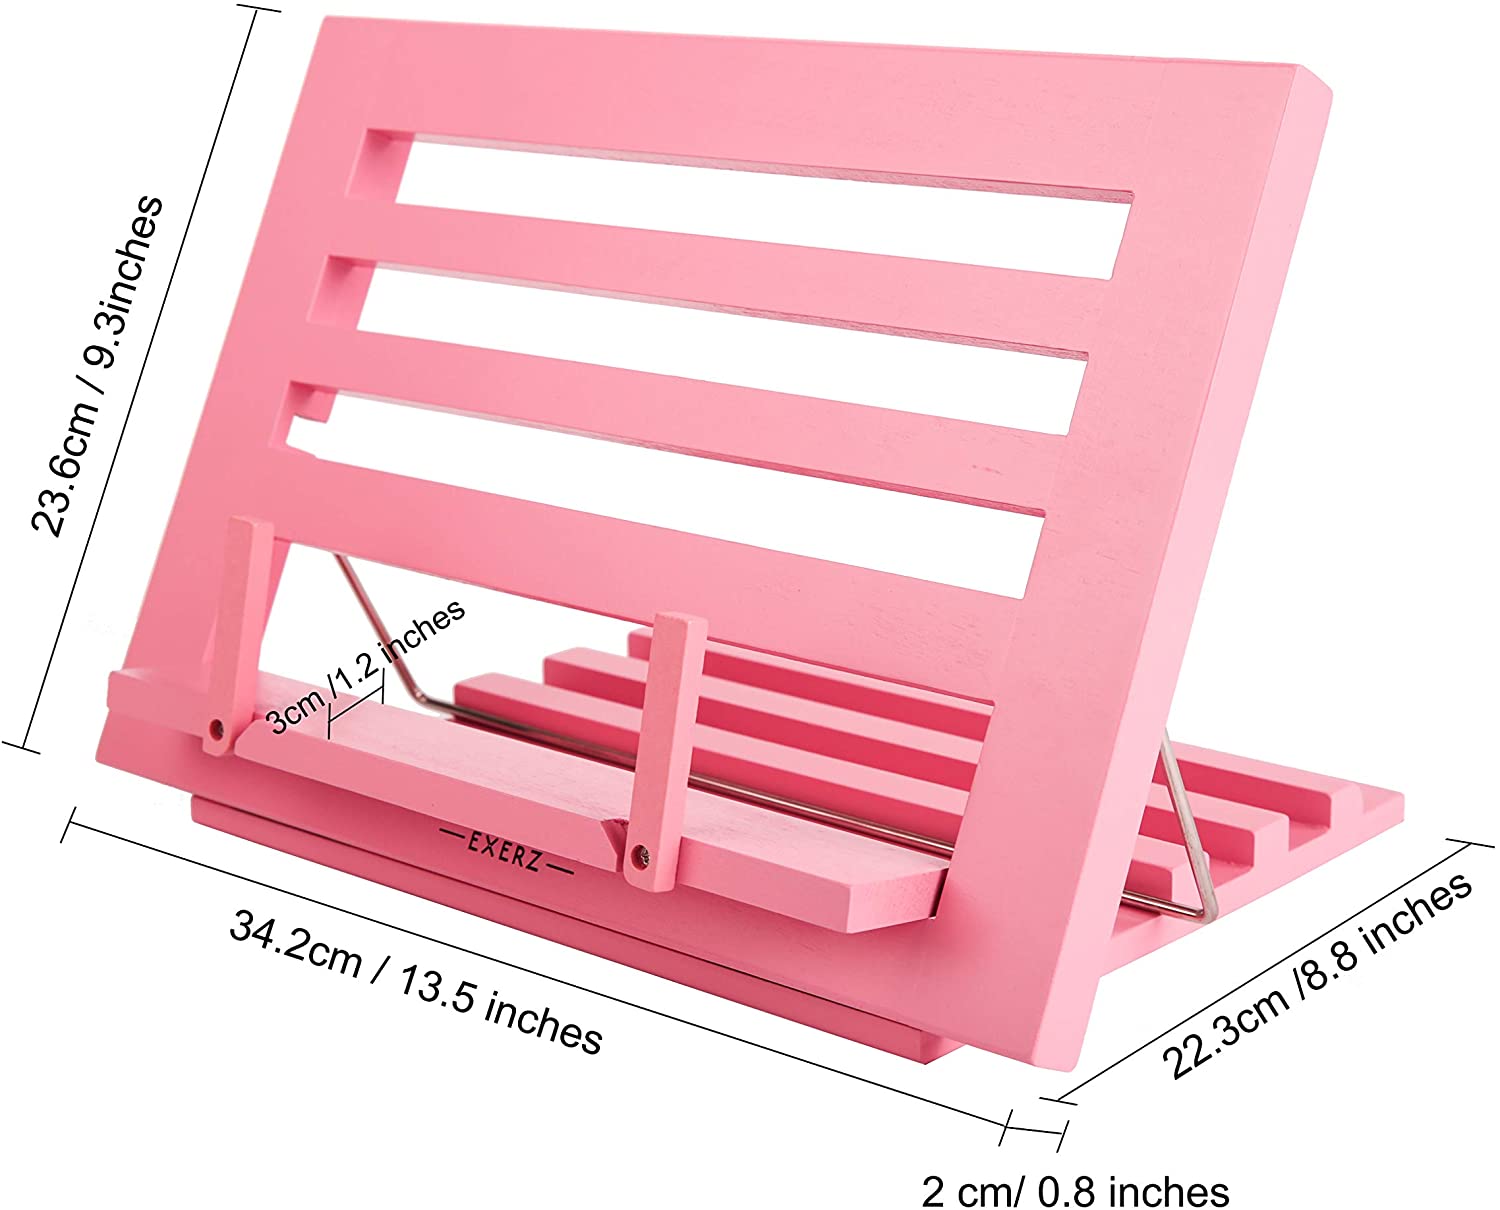 Exerz Wooden Easel Reading Stand - Cookbook Stand - Pink